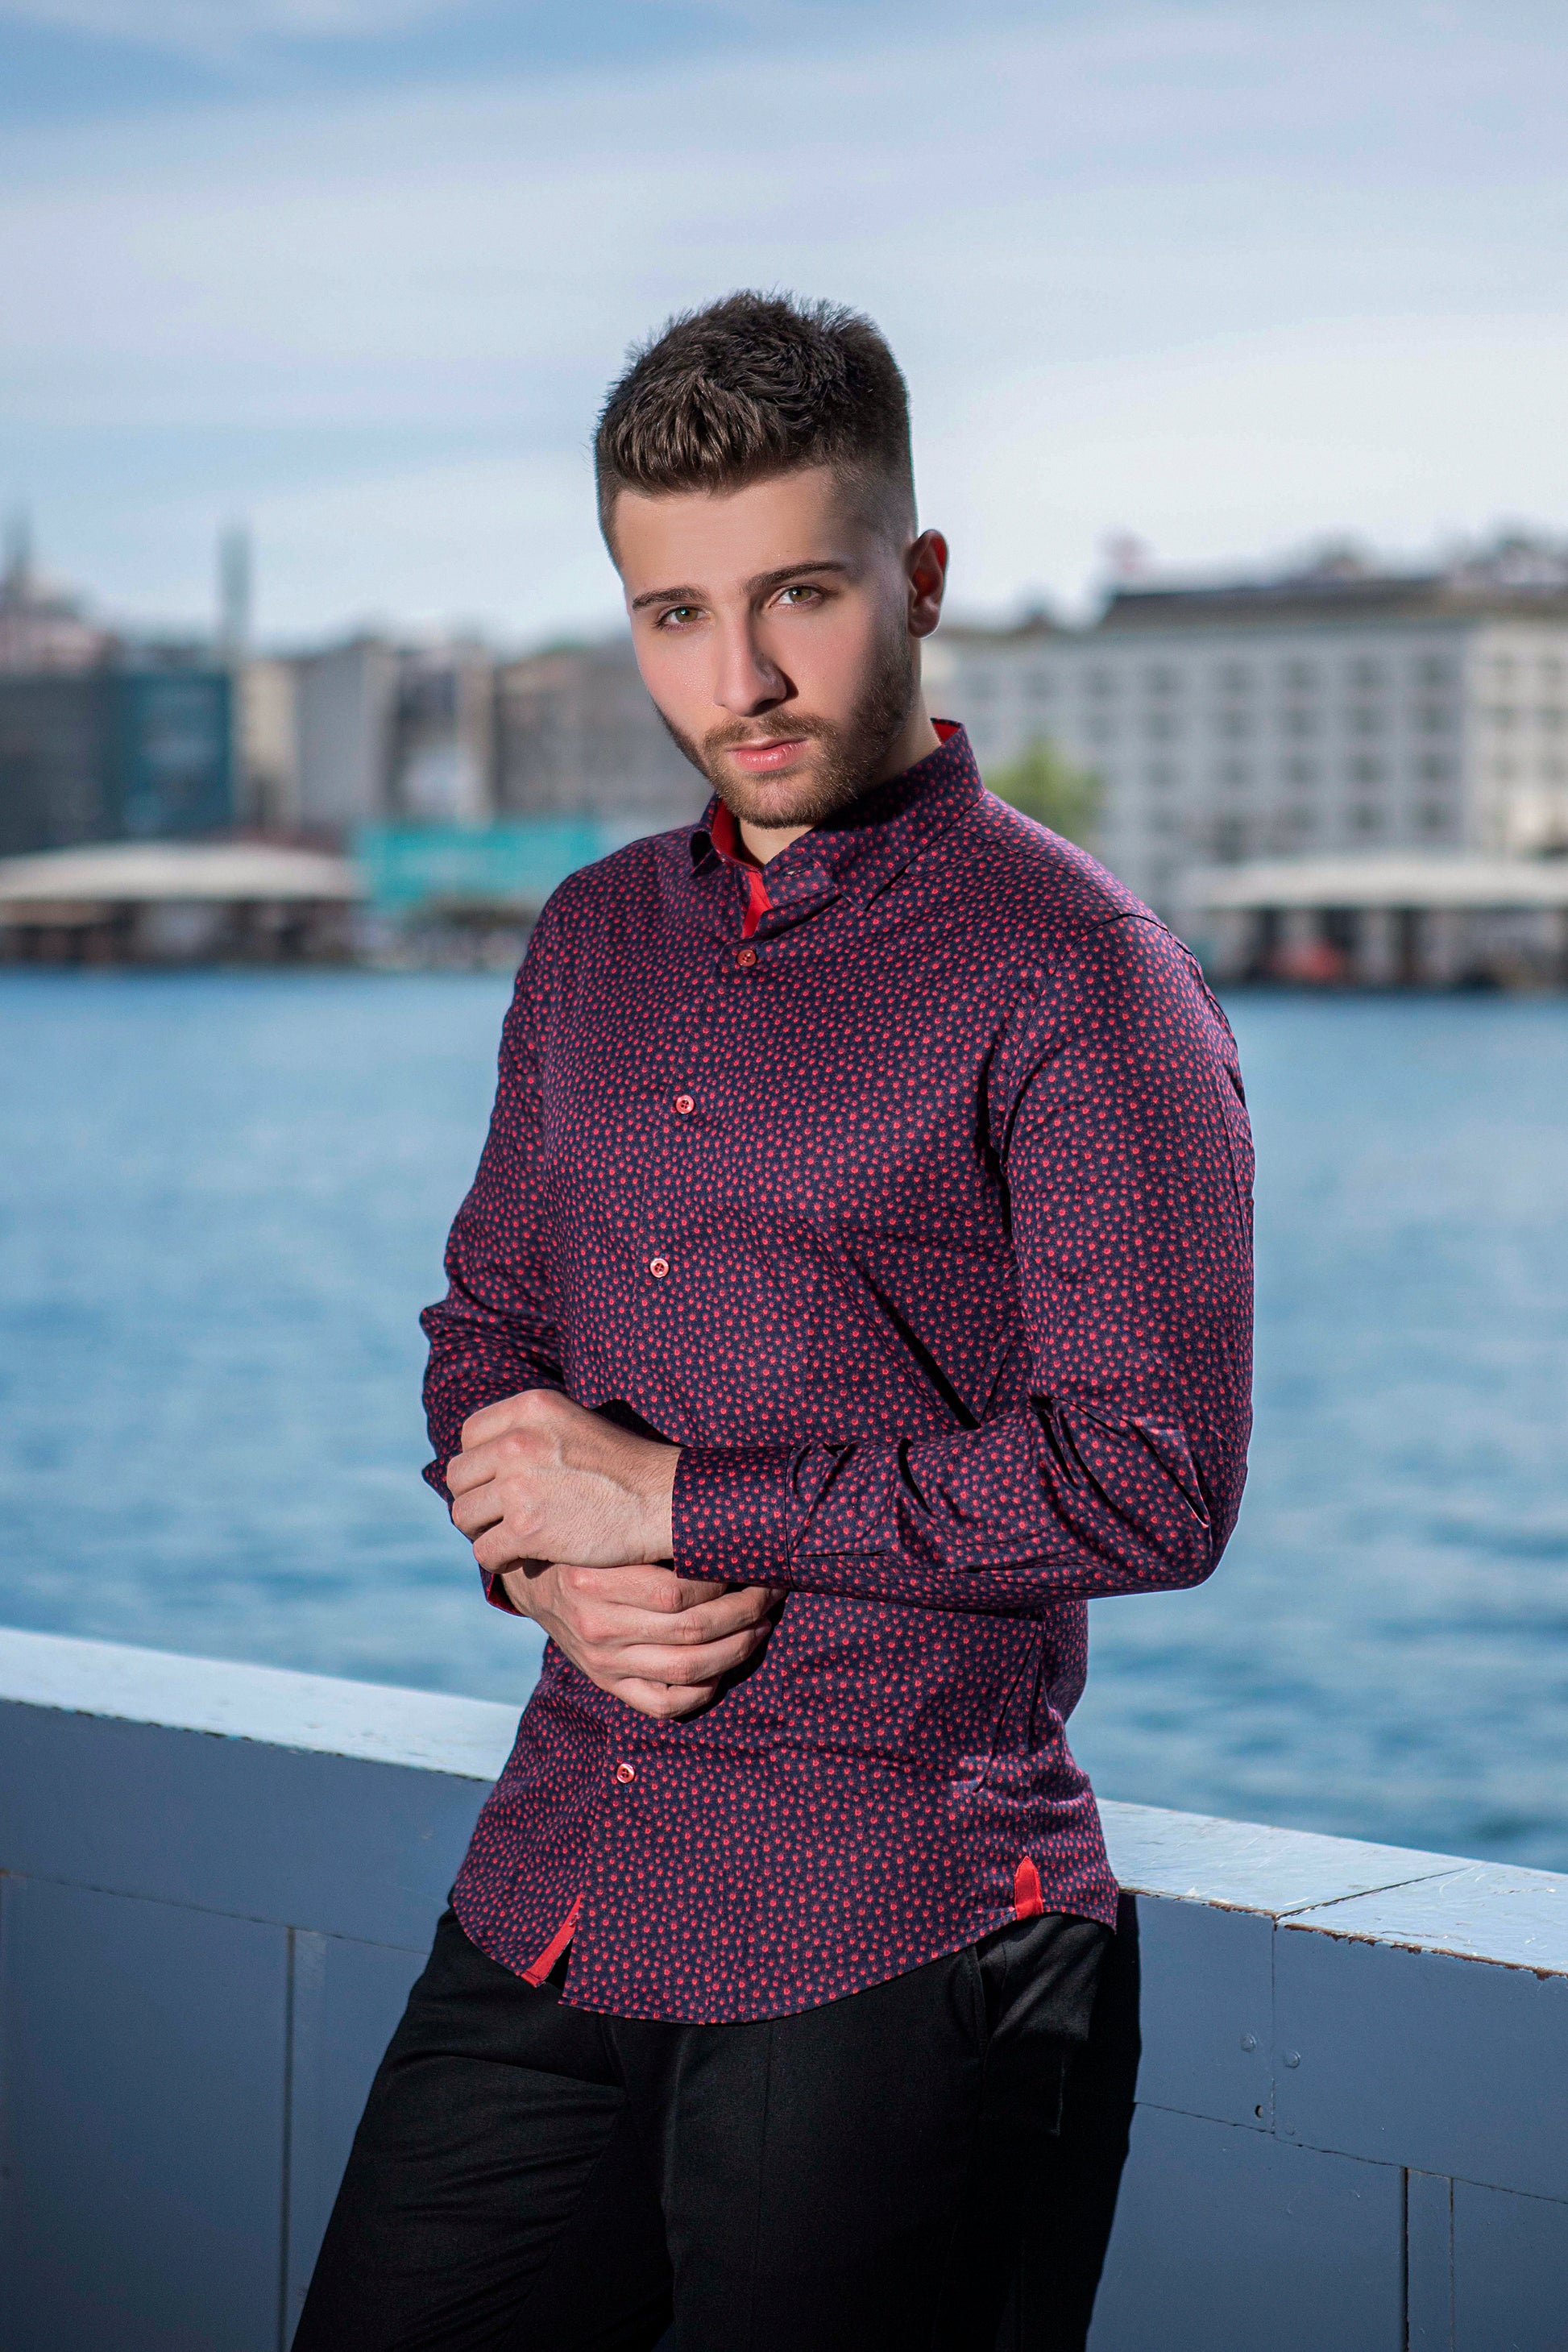 Slim, Star Design Dress Shirt with Red Stars Printed Over Solid Navy. 100% Cotton.